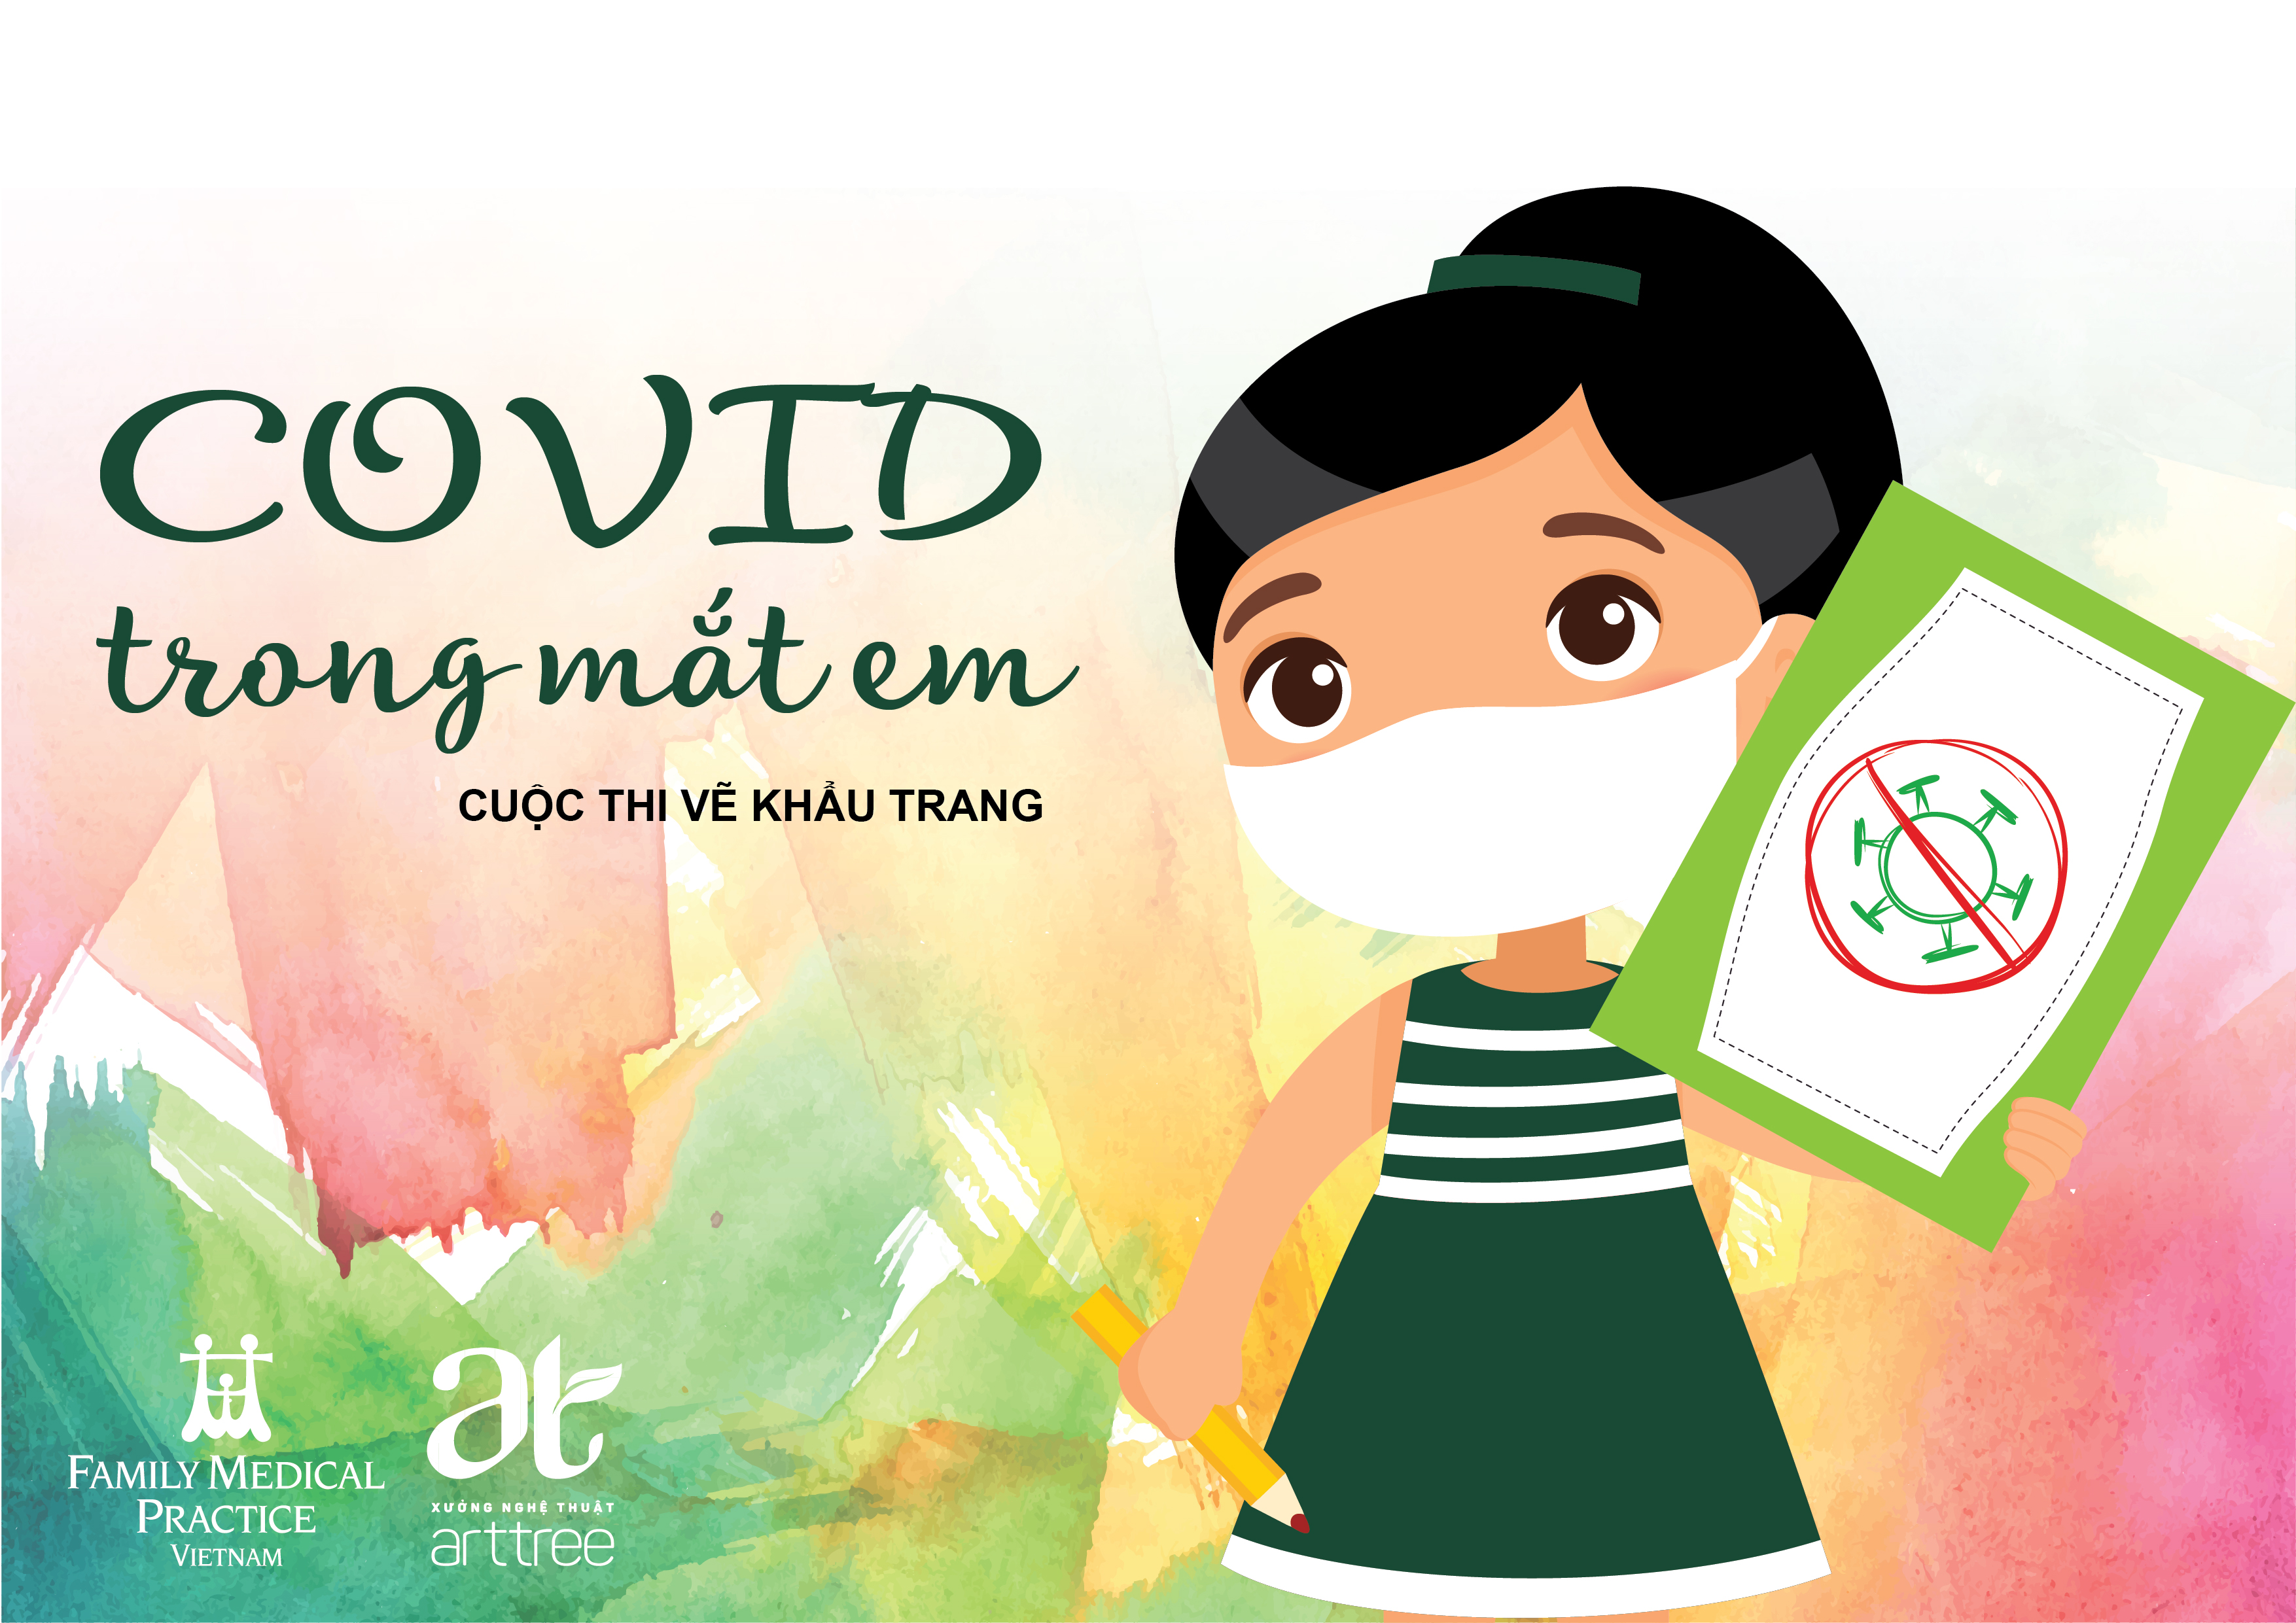 Join us in celebrating the bright minds and cheerful spirits of young artists in our Covid trong mắt em drawing competition. The theme promises to be heartwarming and uplifting, so gather your family and come take part in this joyous event!